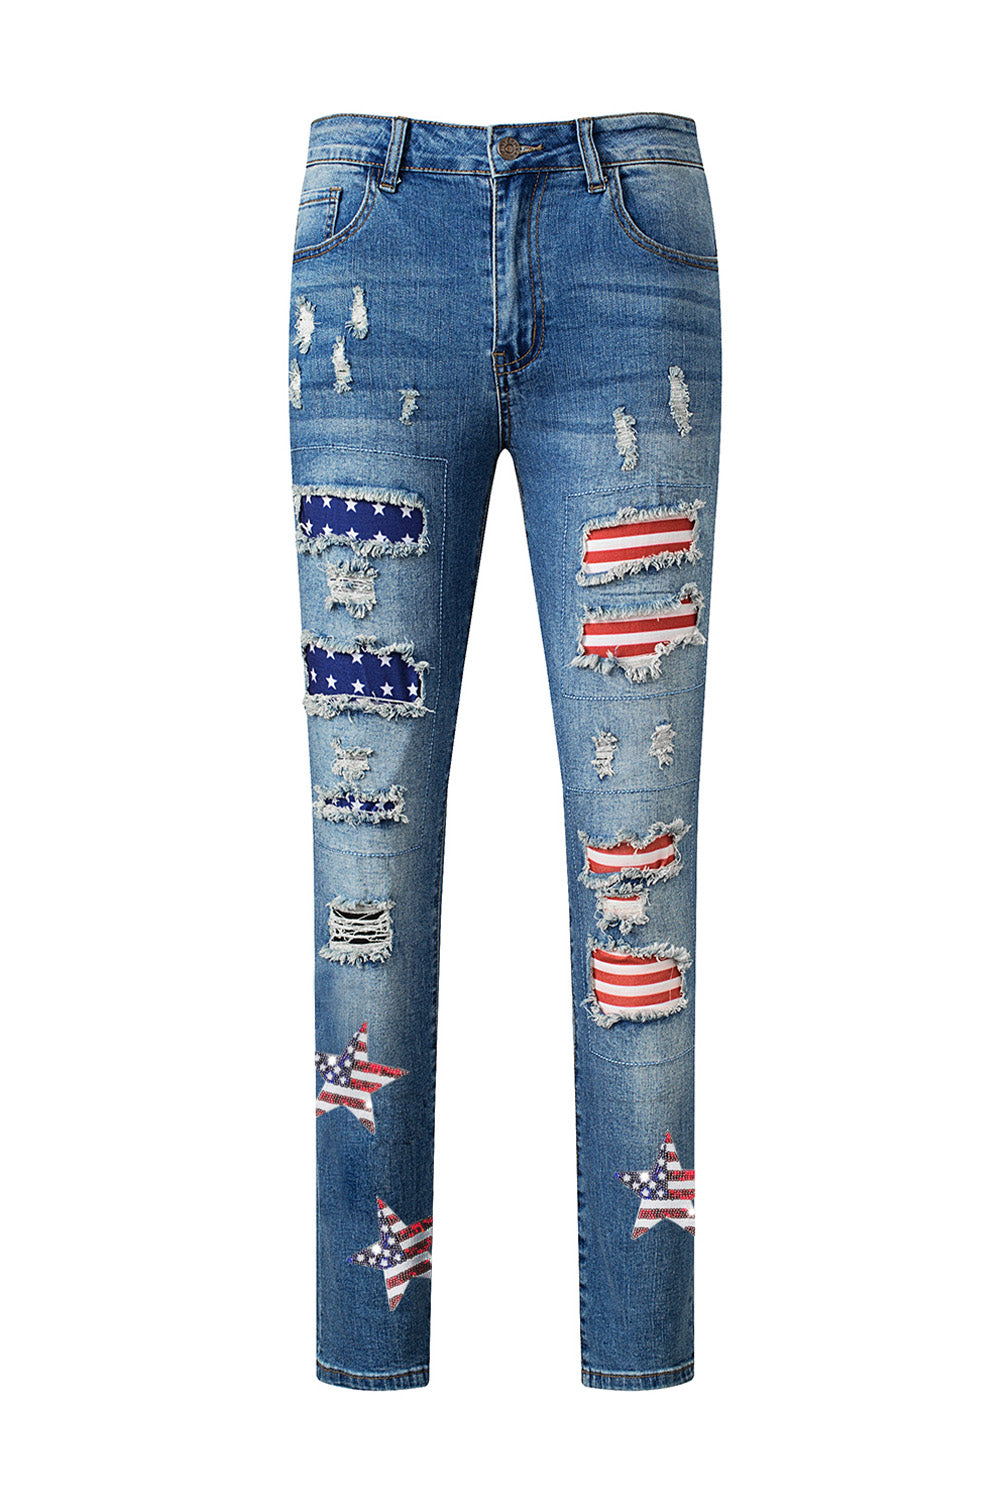 Sky Blue Sequin American Flag Star Graphic Distressed Straight Jeans Graphic Pants JT's Designer Fashion